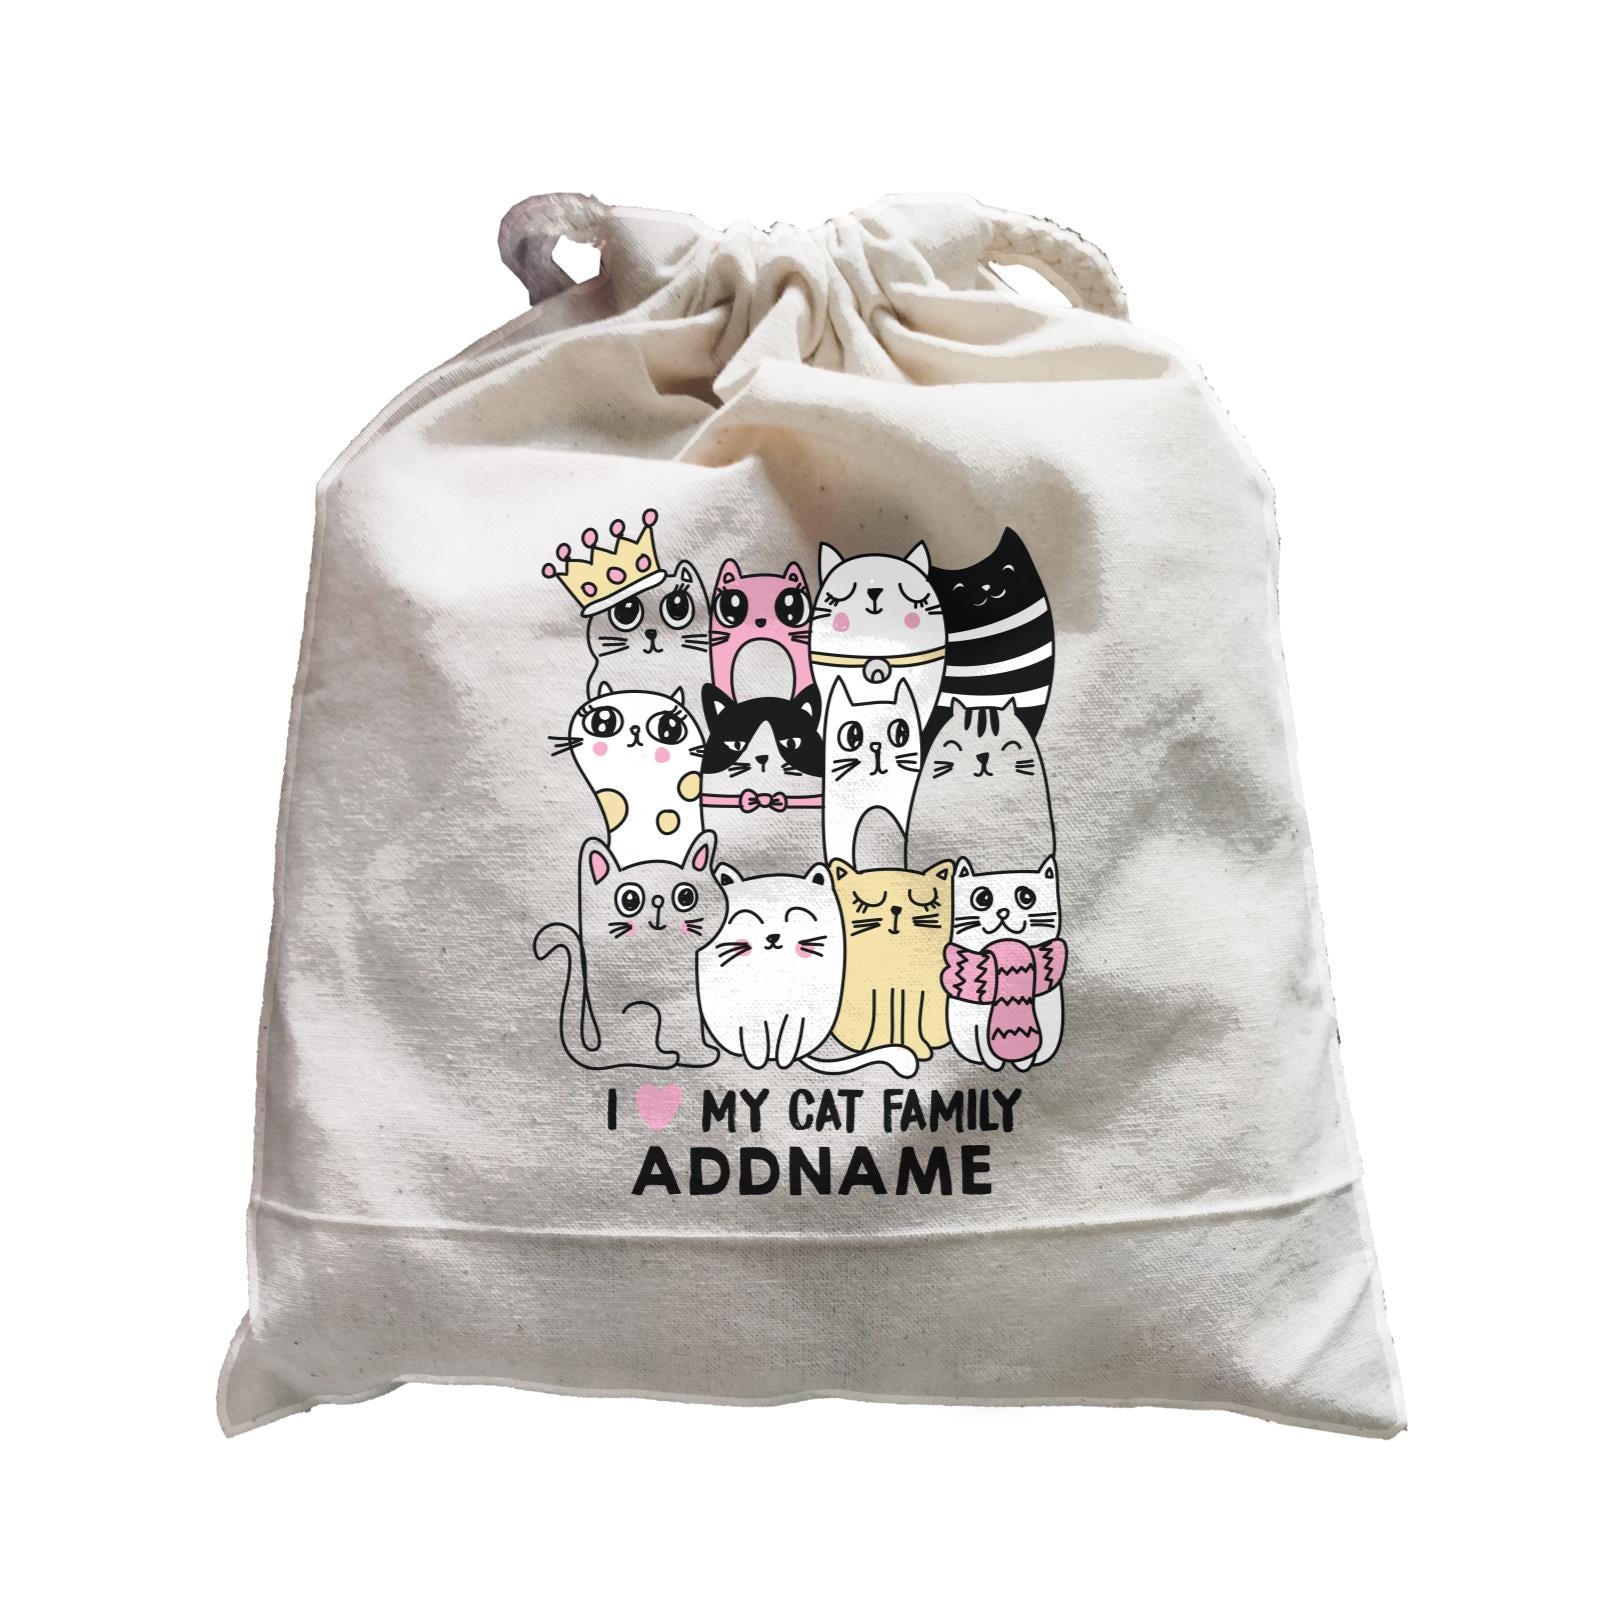 Cool Vibrant Series I Love My Cat Family Addname Satchel